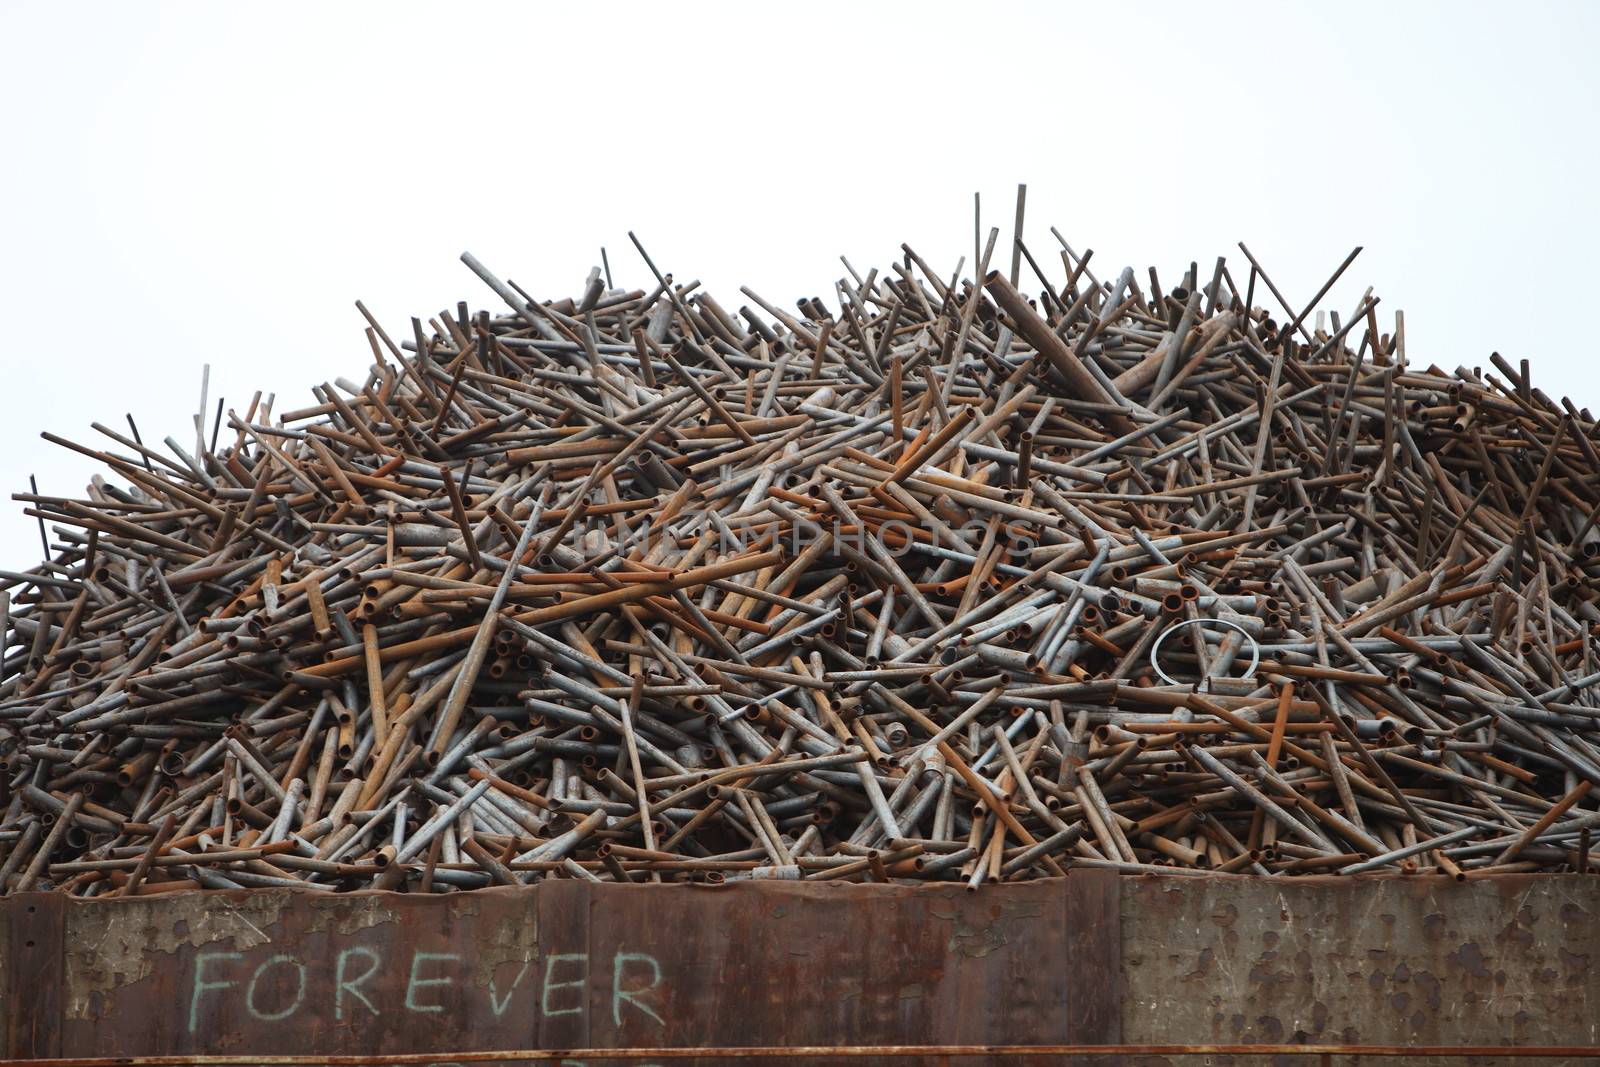 Pile of old rusty industrial metal in a container waiting to be disposed of